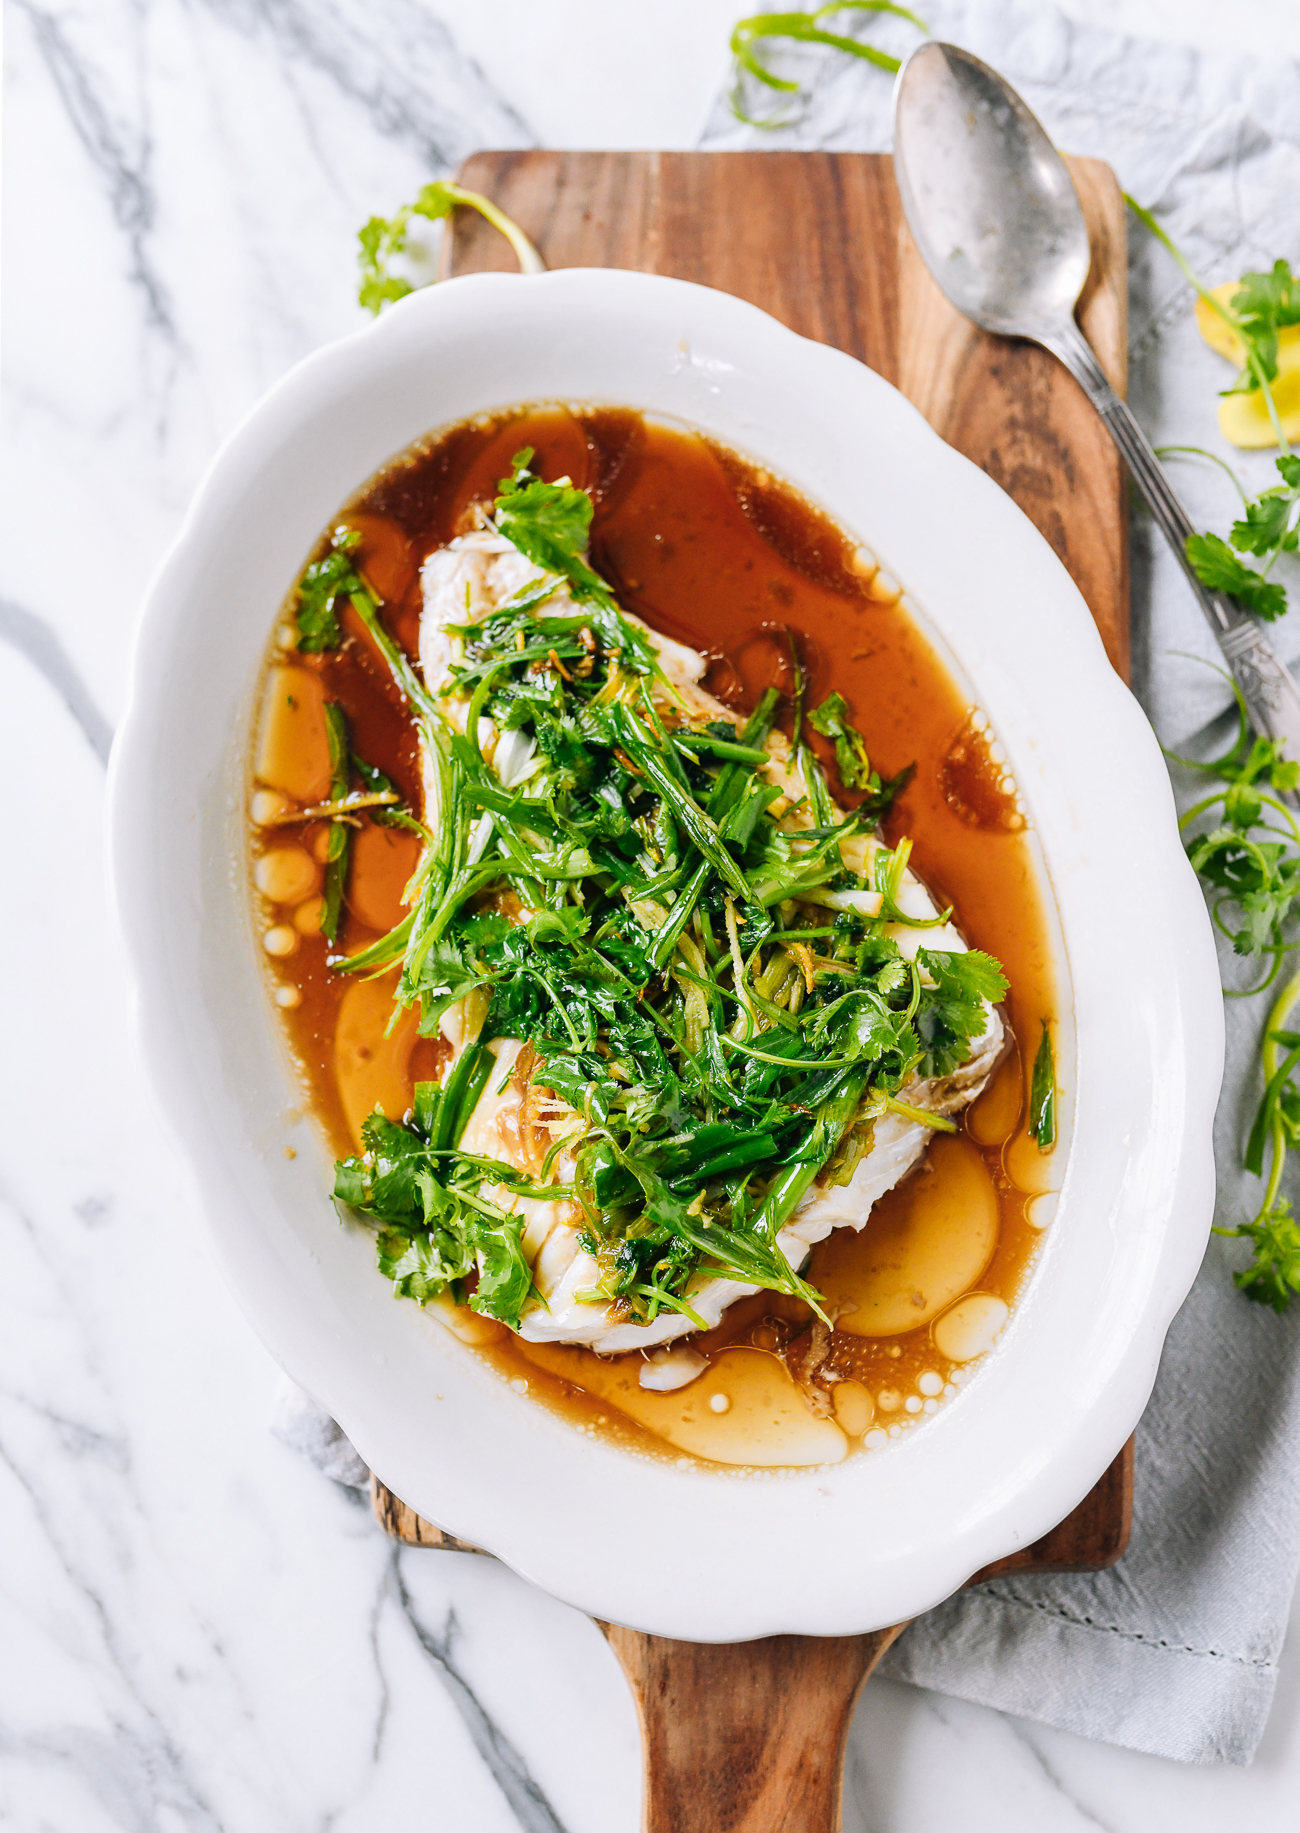 Cantonese Steamed Fish: A 20 Minute Recipe - The Woks of Life